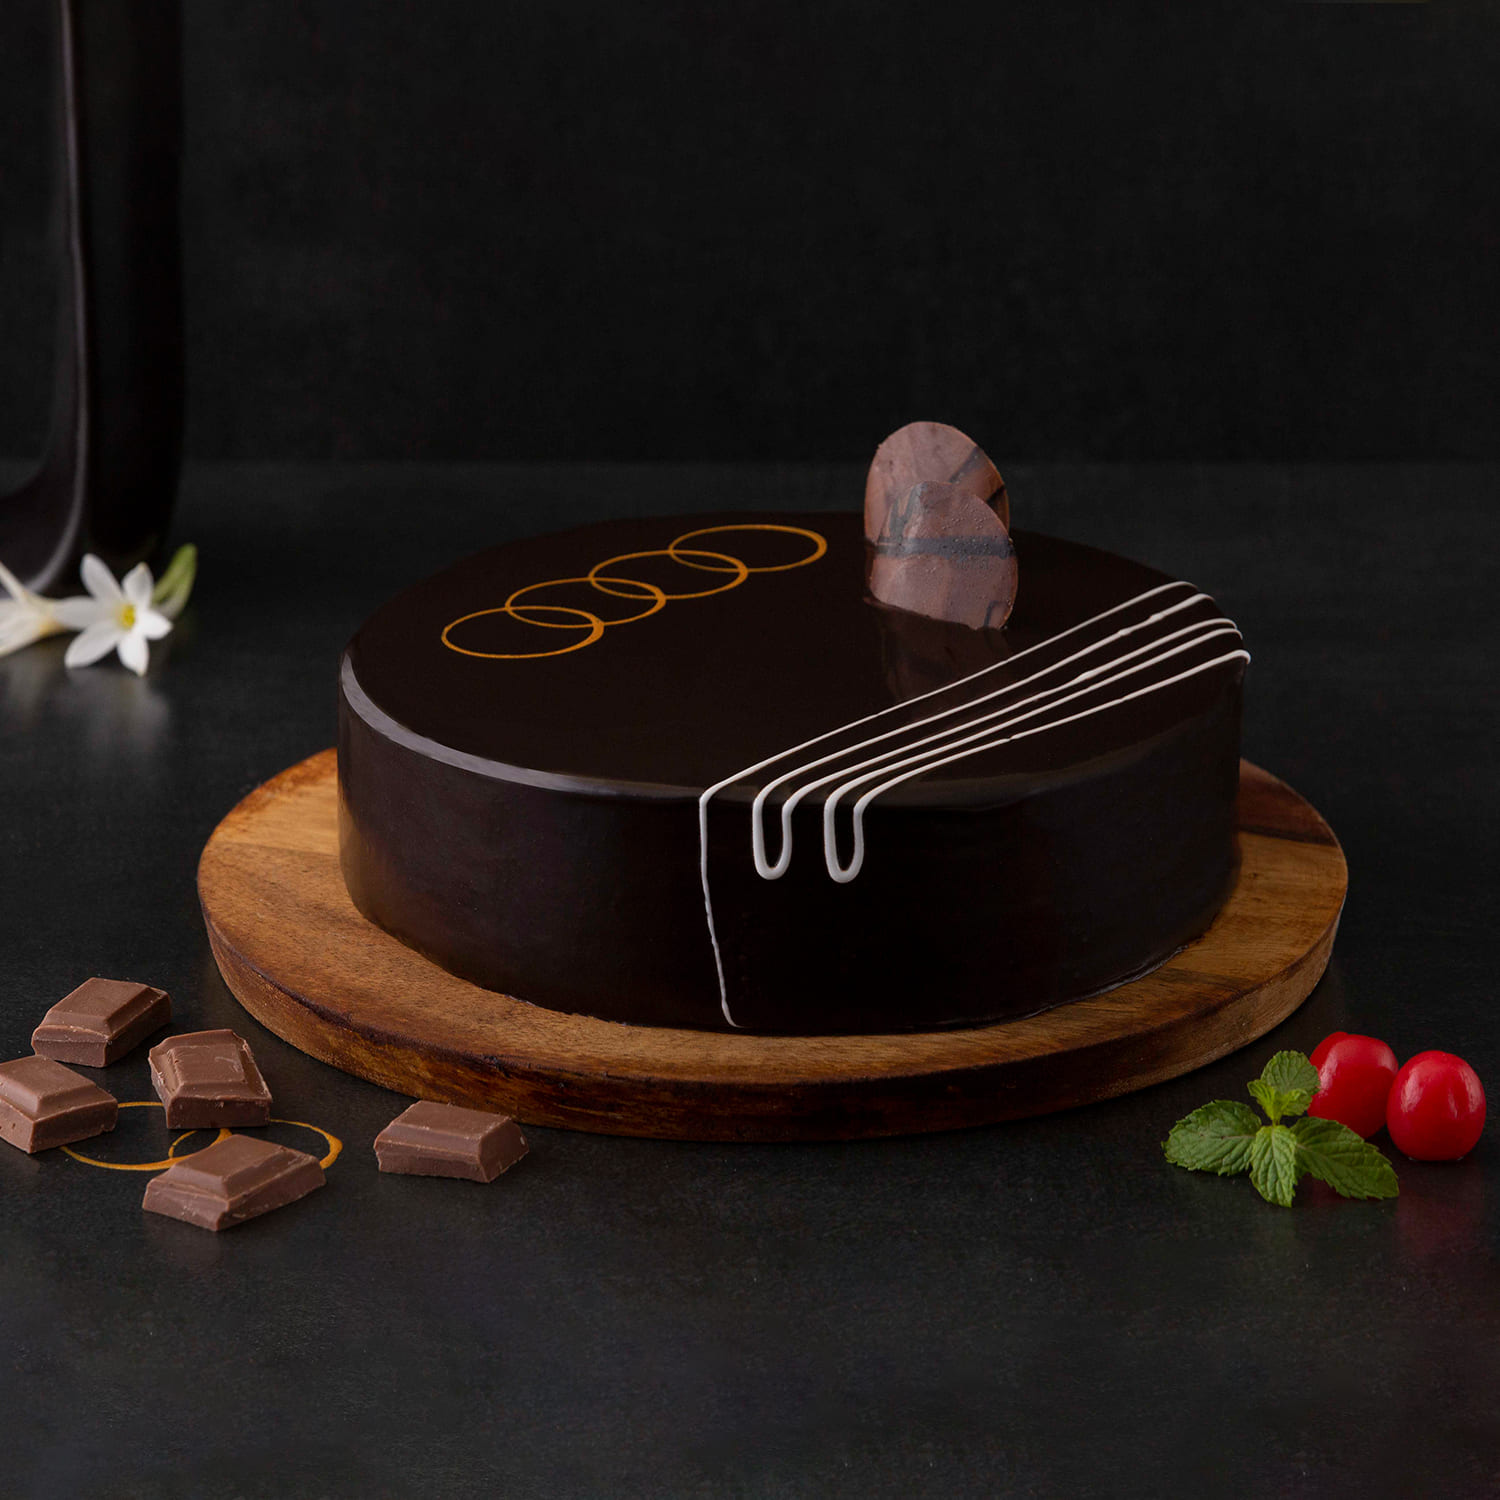 Mio Amore - Celebrate your birthday in style with this yummilicious Chocolate  Cake from our Dream Shape range. #DreamShapeCake #FanMade #ChocolateCake |  Facebook